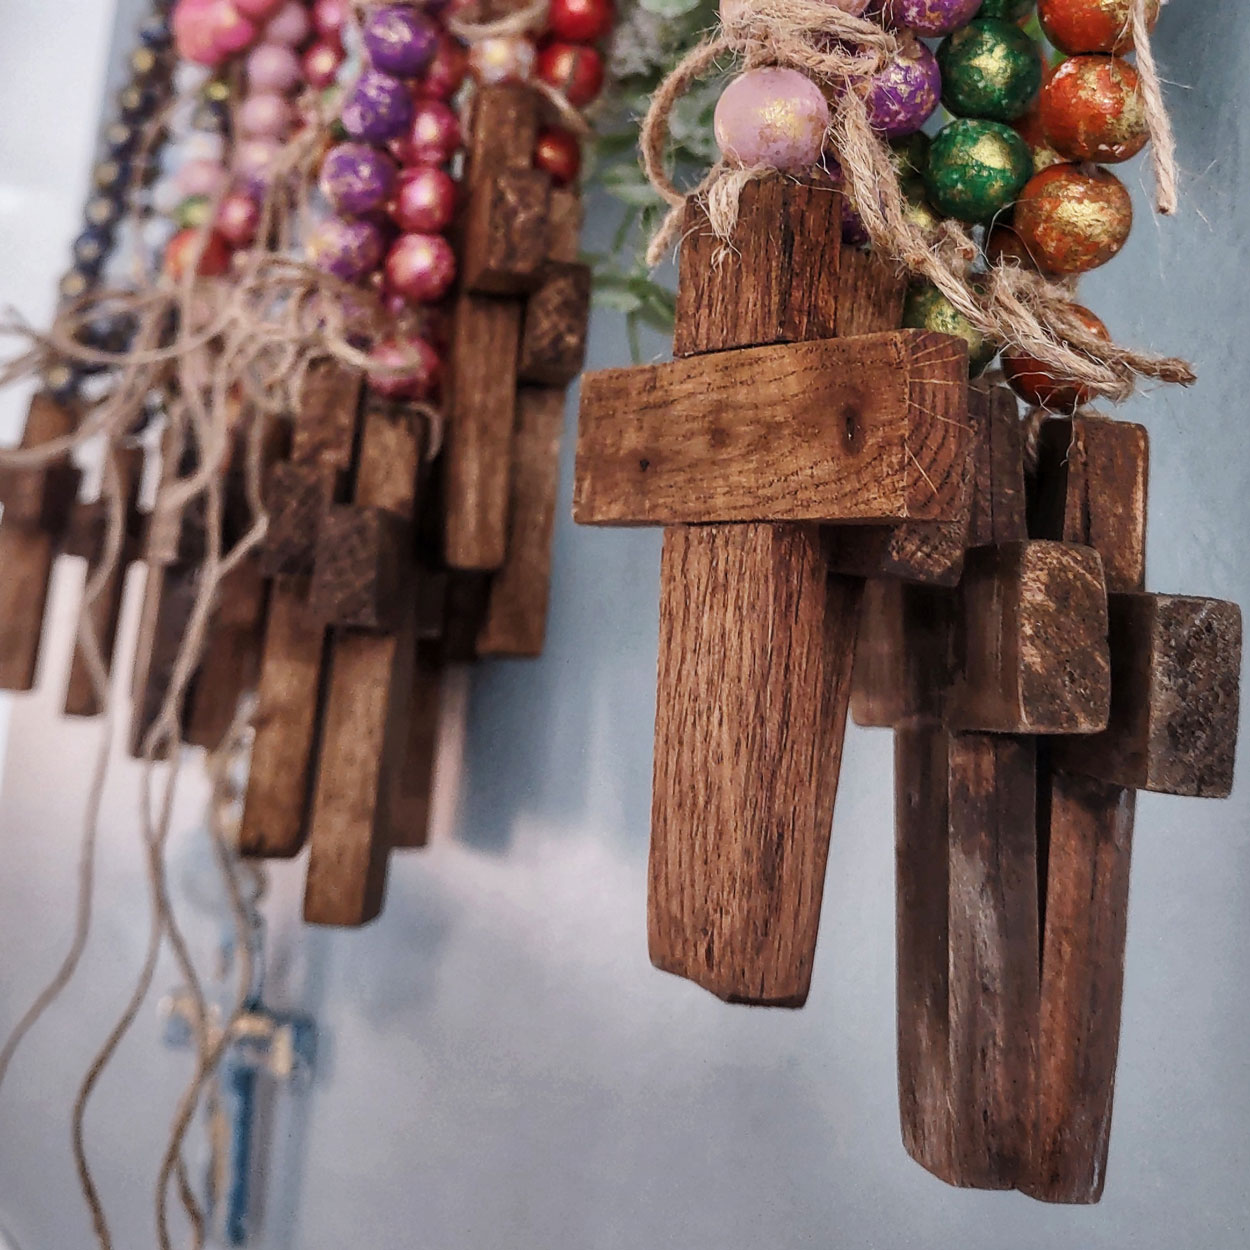 The little crosses are maple or oak, and hang from hand-painted wooden beads, they are a very pretty ornament